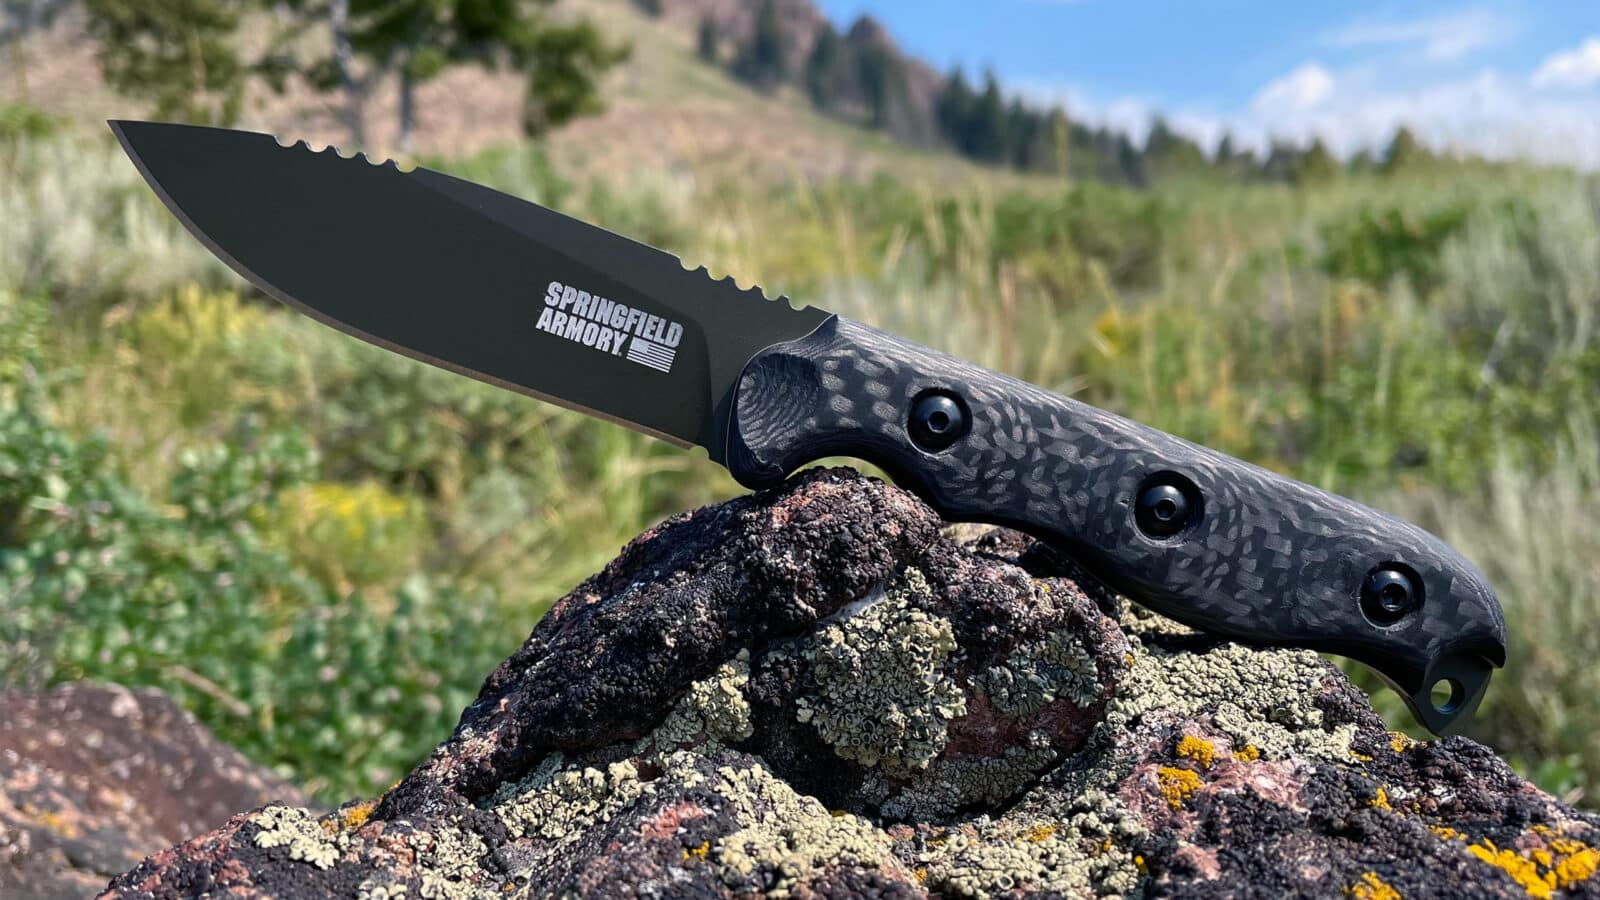 https://www.thearmorylife.com/wp-content/uploads/2022/09/Springfield-Armory-knife-review-1600x900.jpg